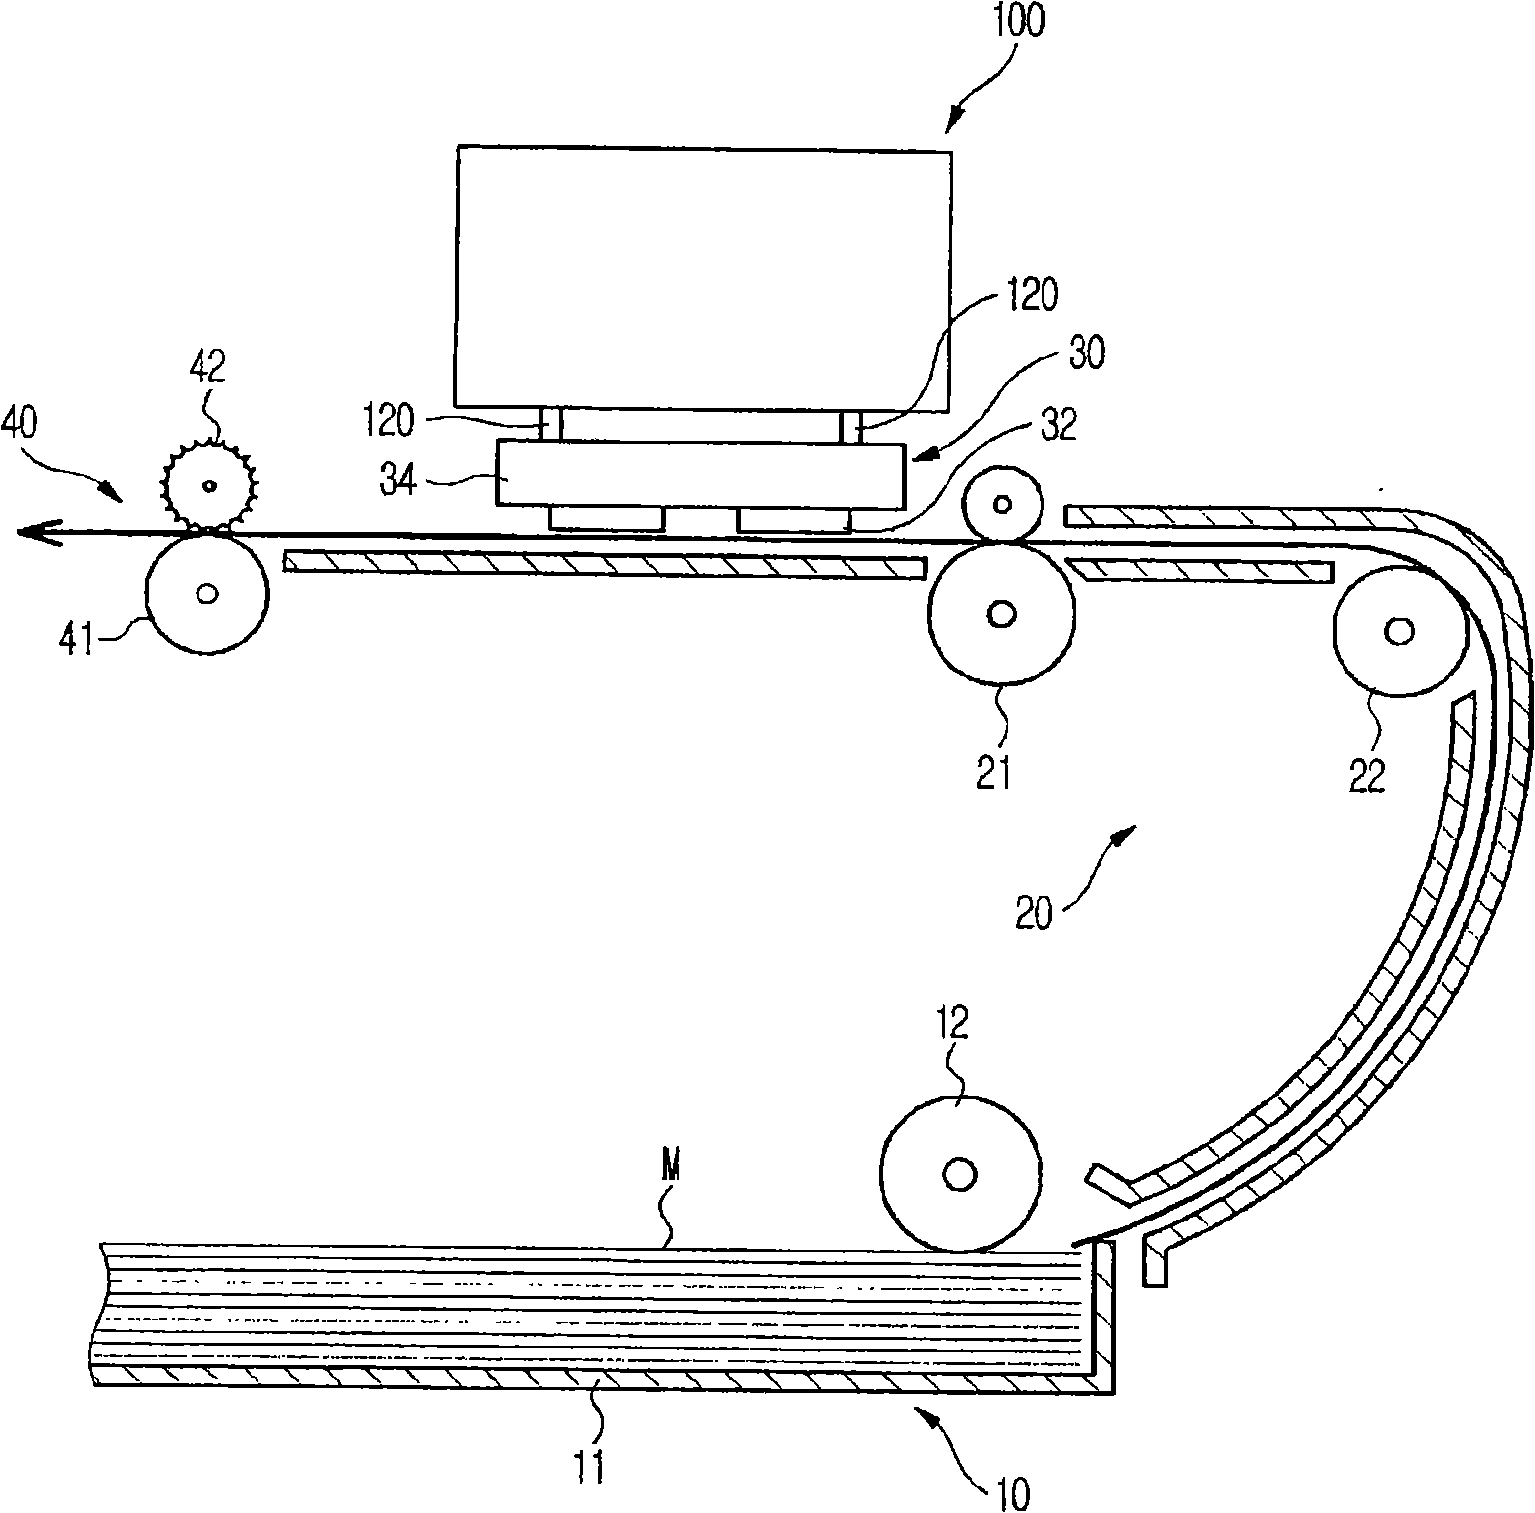 Ink jet image forming apparatus